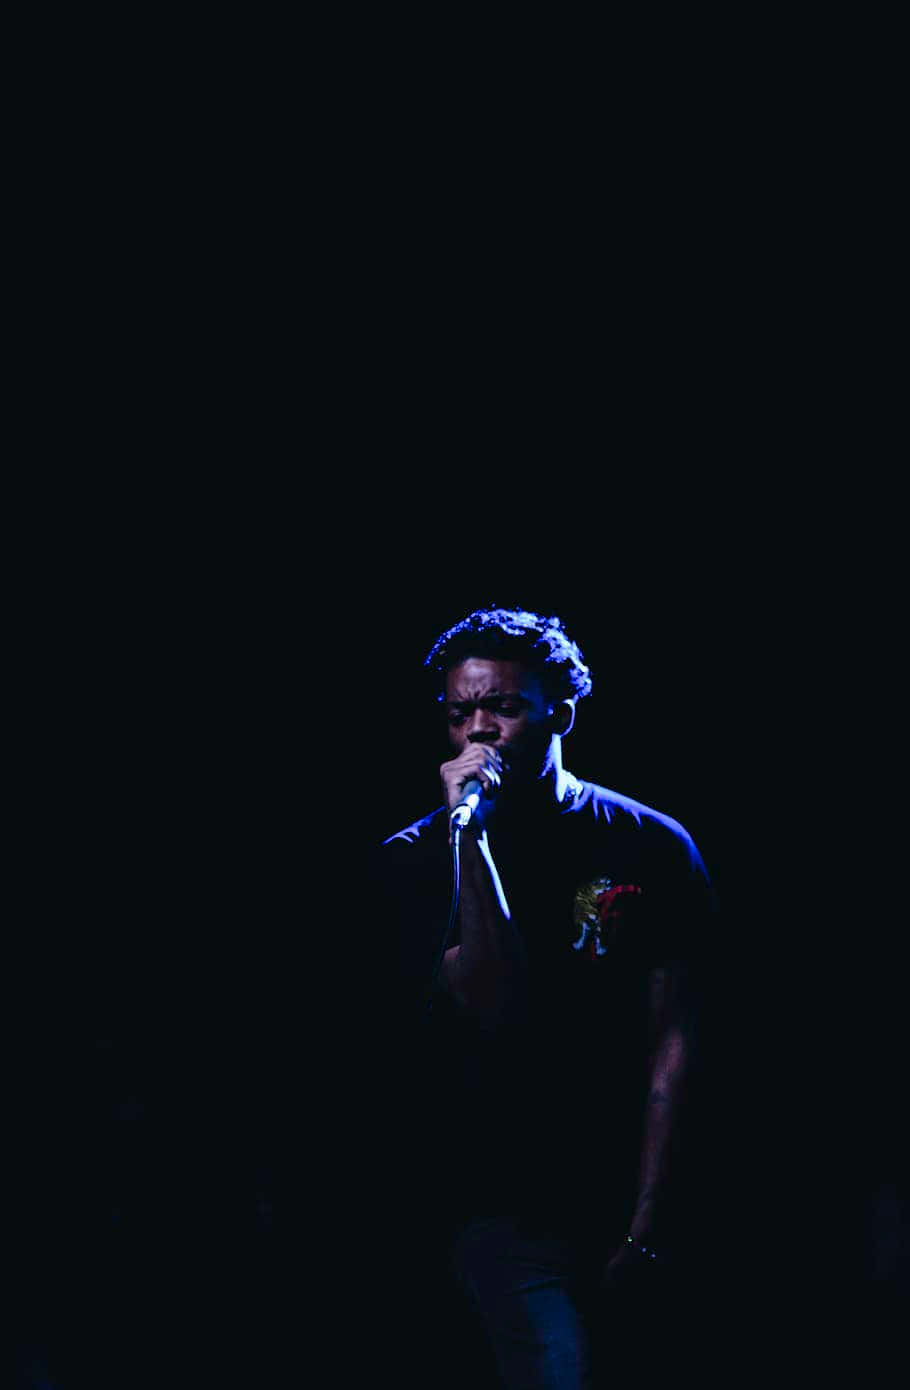 A Man Singing Into A Microphone In The Dark Wallpaper